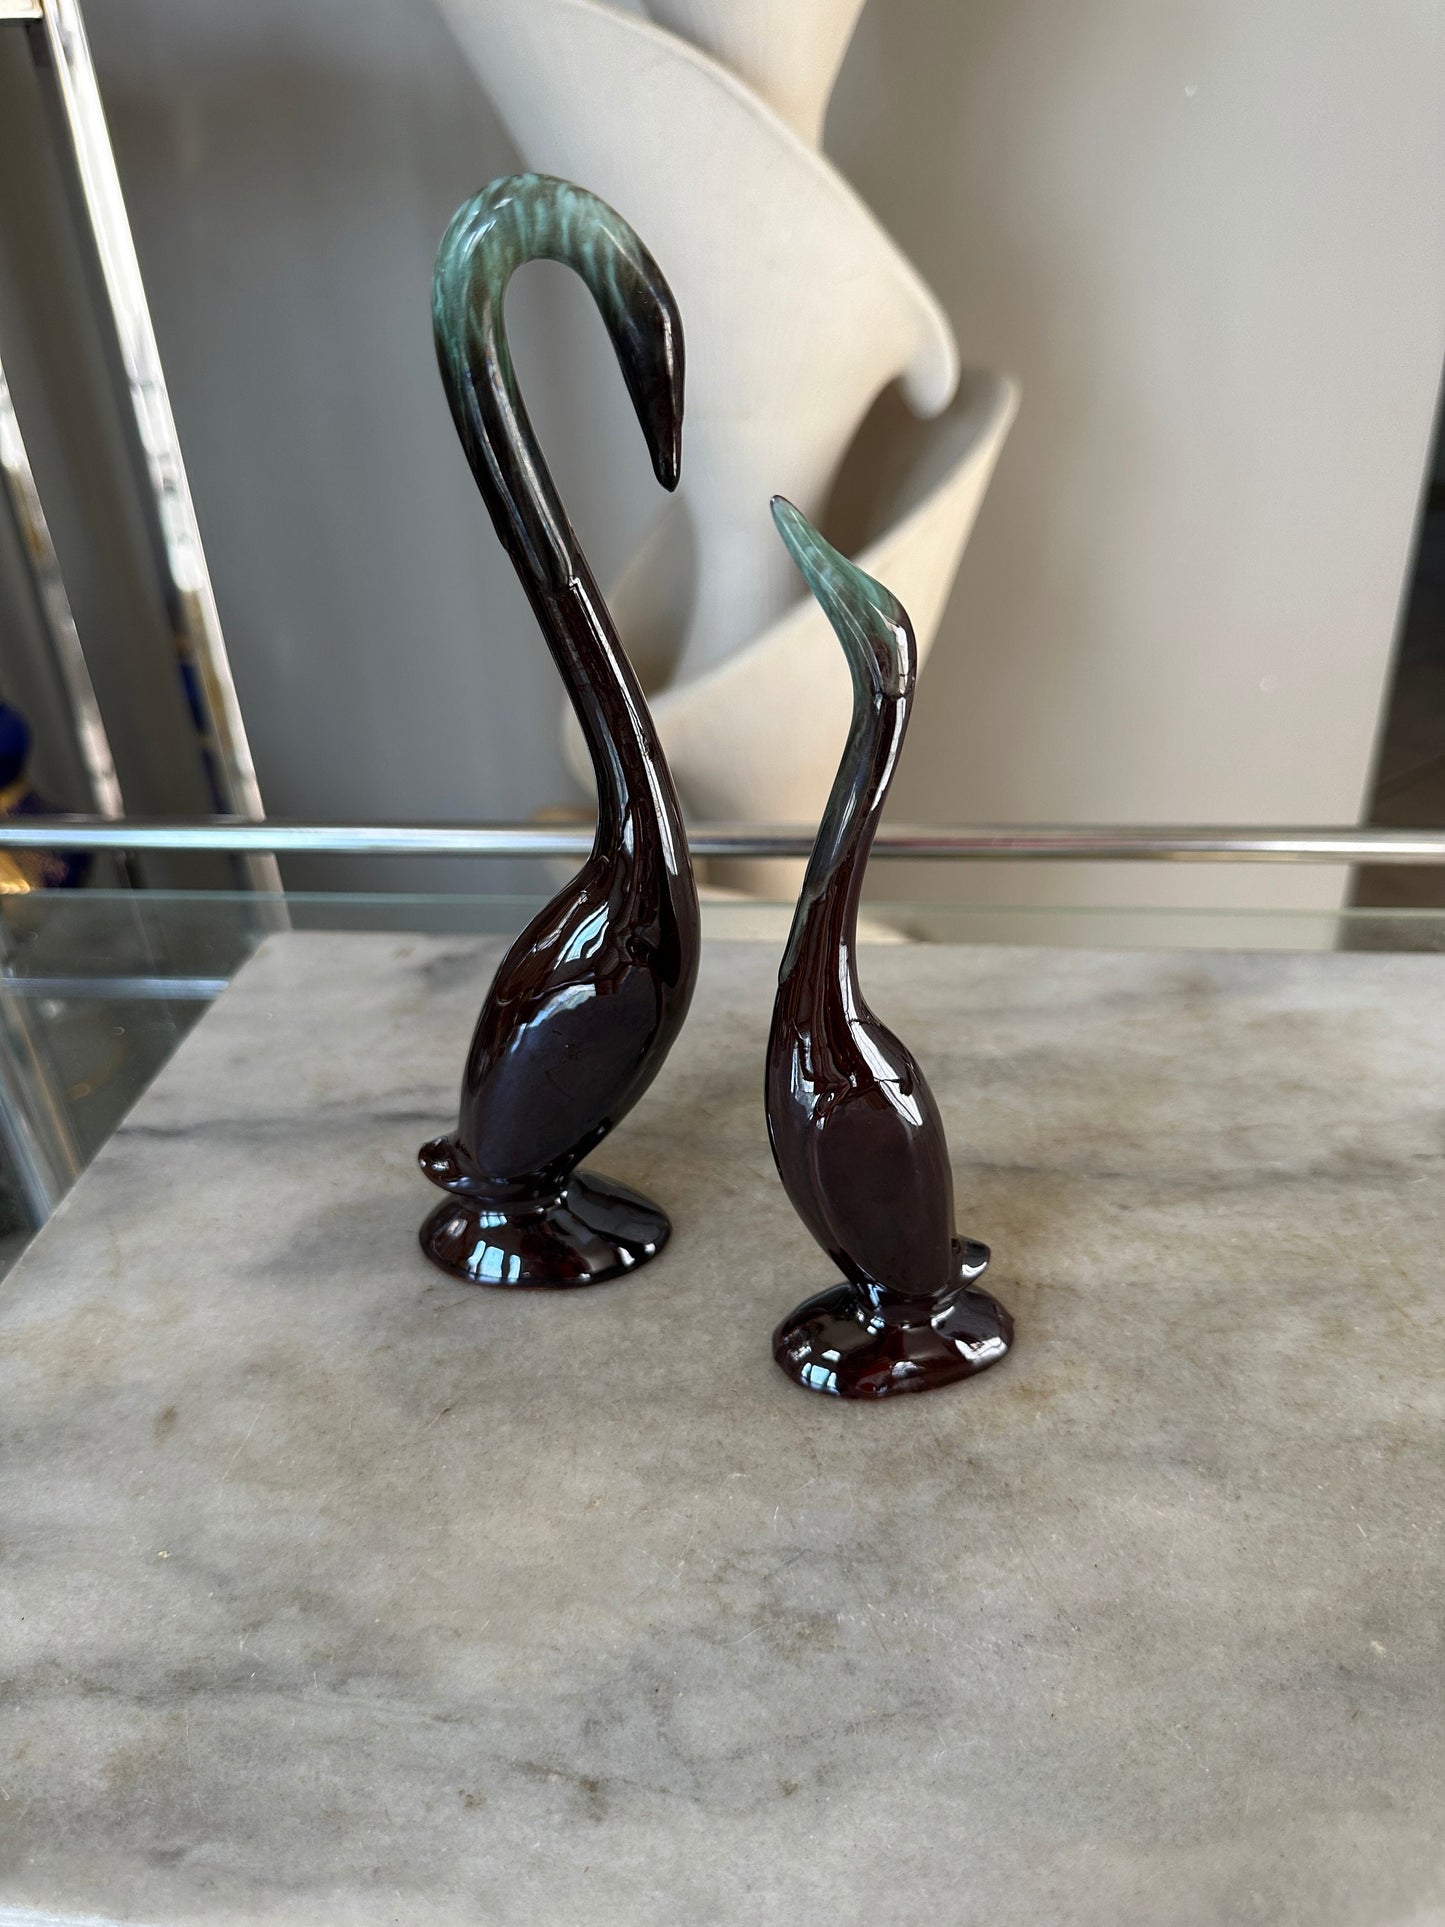 Awesome Unique Pair Of MCM Redware Cranes with Black and Aqua Drip Glaze Accents